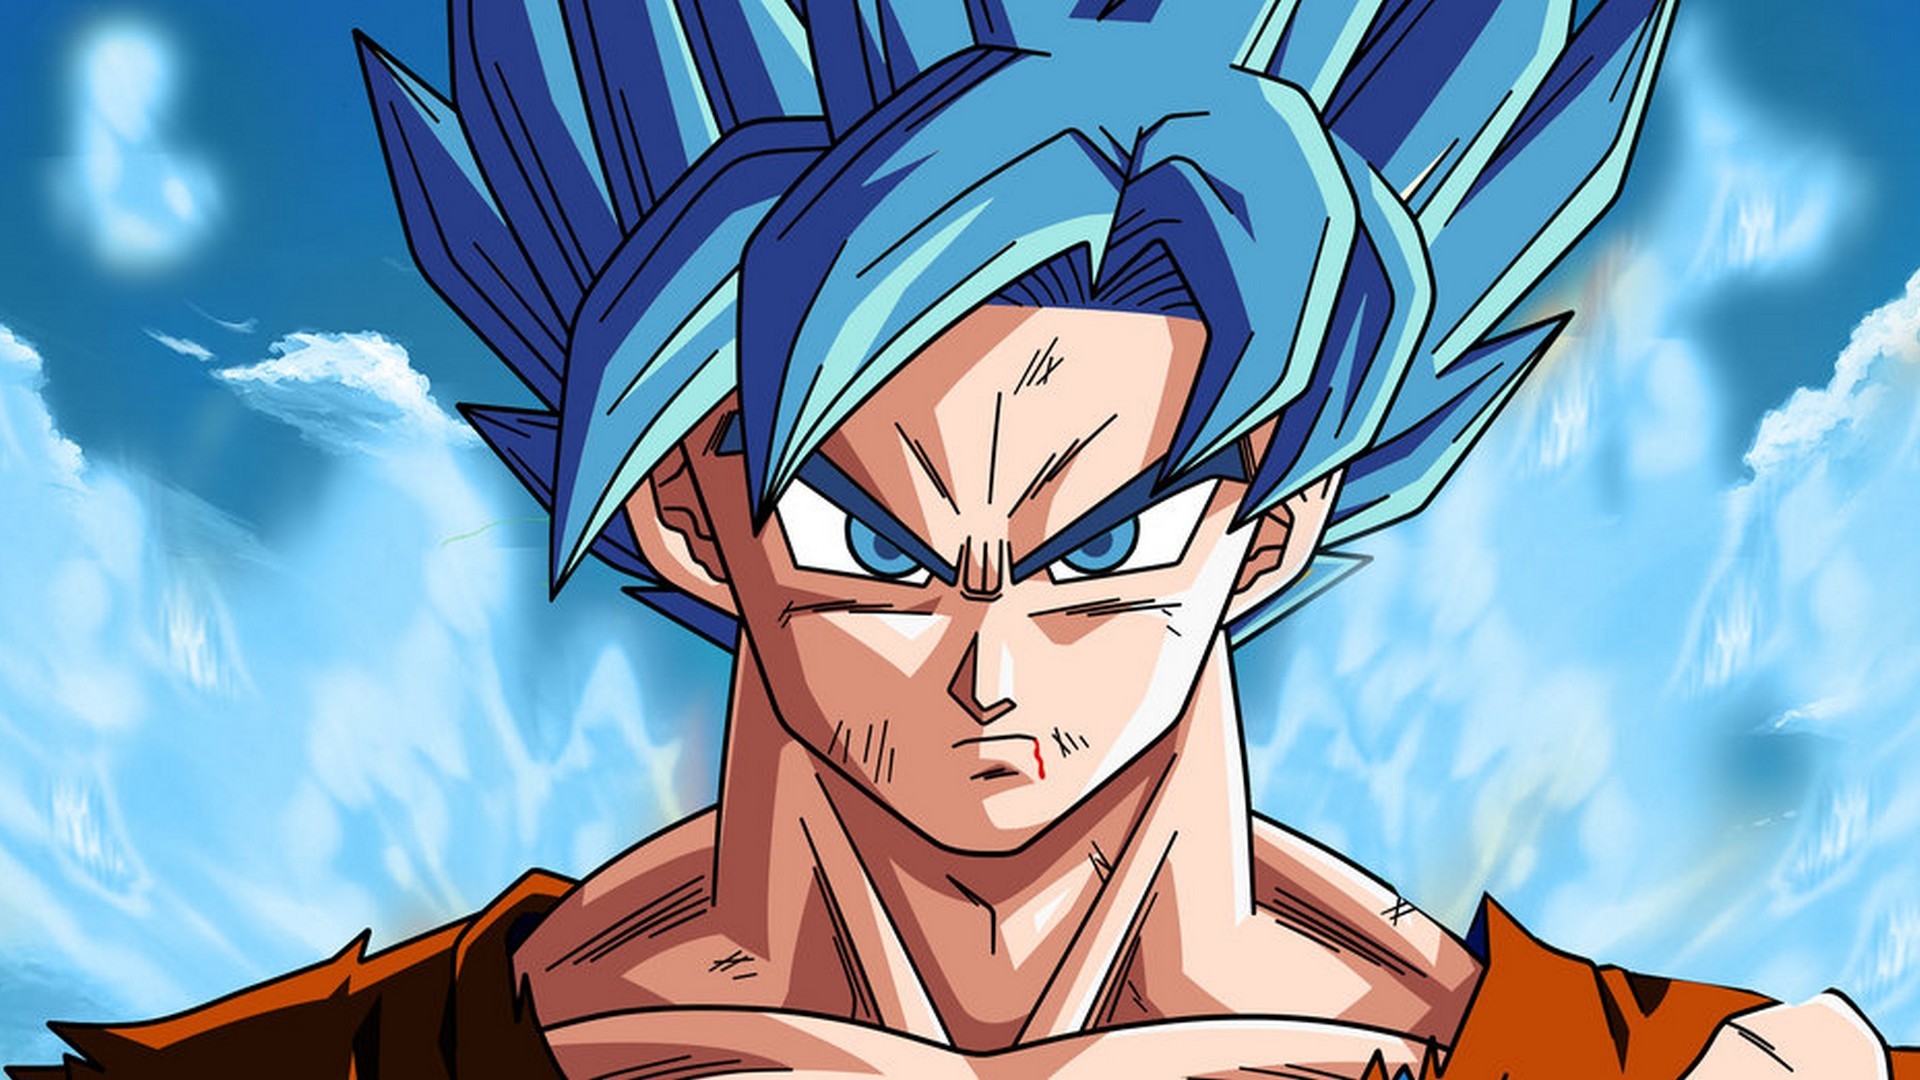 Wallpaper Goku SSJ Blue HD with image resolution 1920x1080 pixel. You can make this wallpaper for your Desktop Computer Backgrounds, Mac Wallpapers, Android Lock screen or iPhone Screensavers